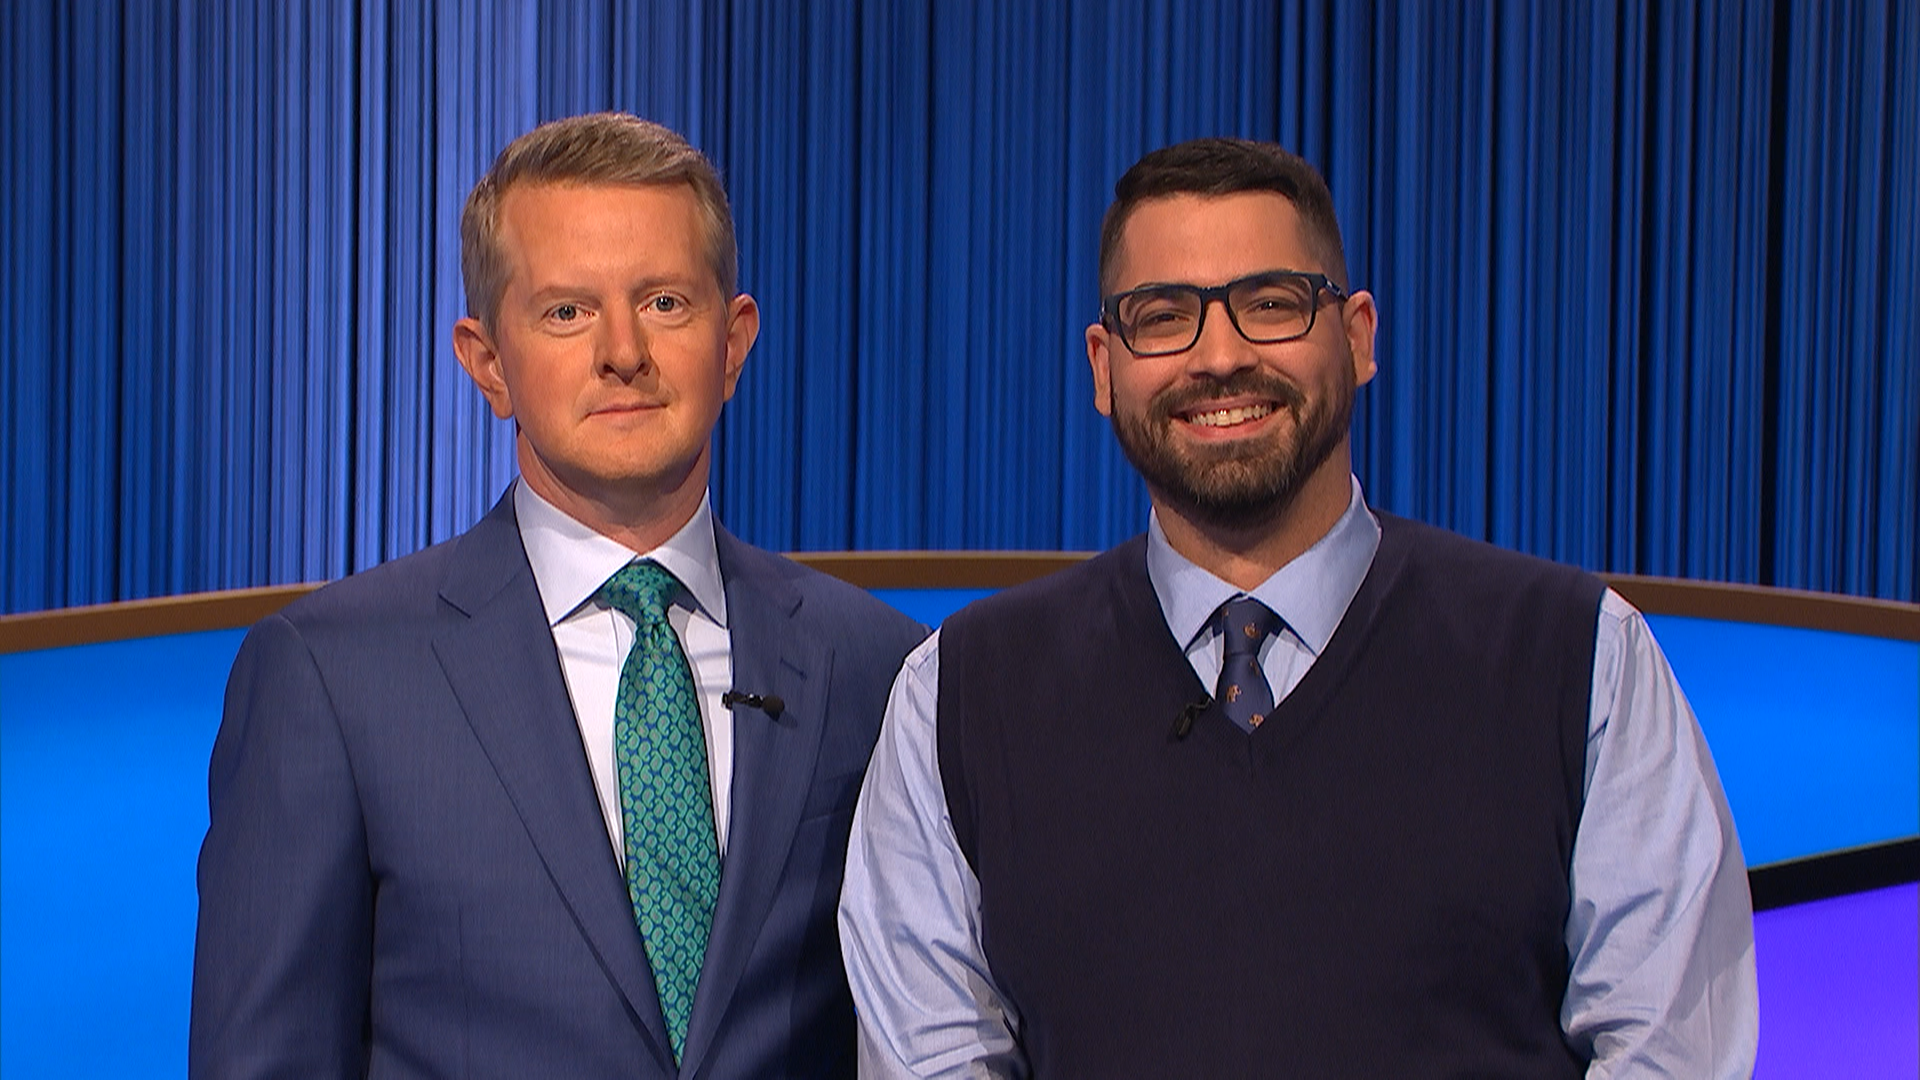 Catching up with Robert Voyles after 'Jeopardy!' appearance